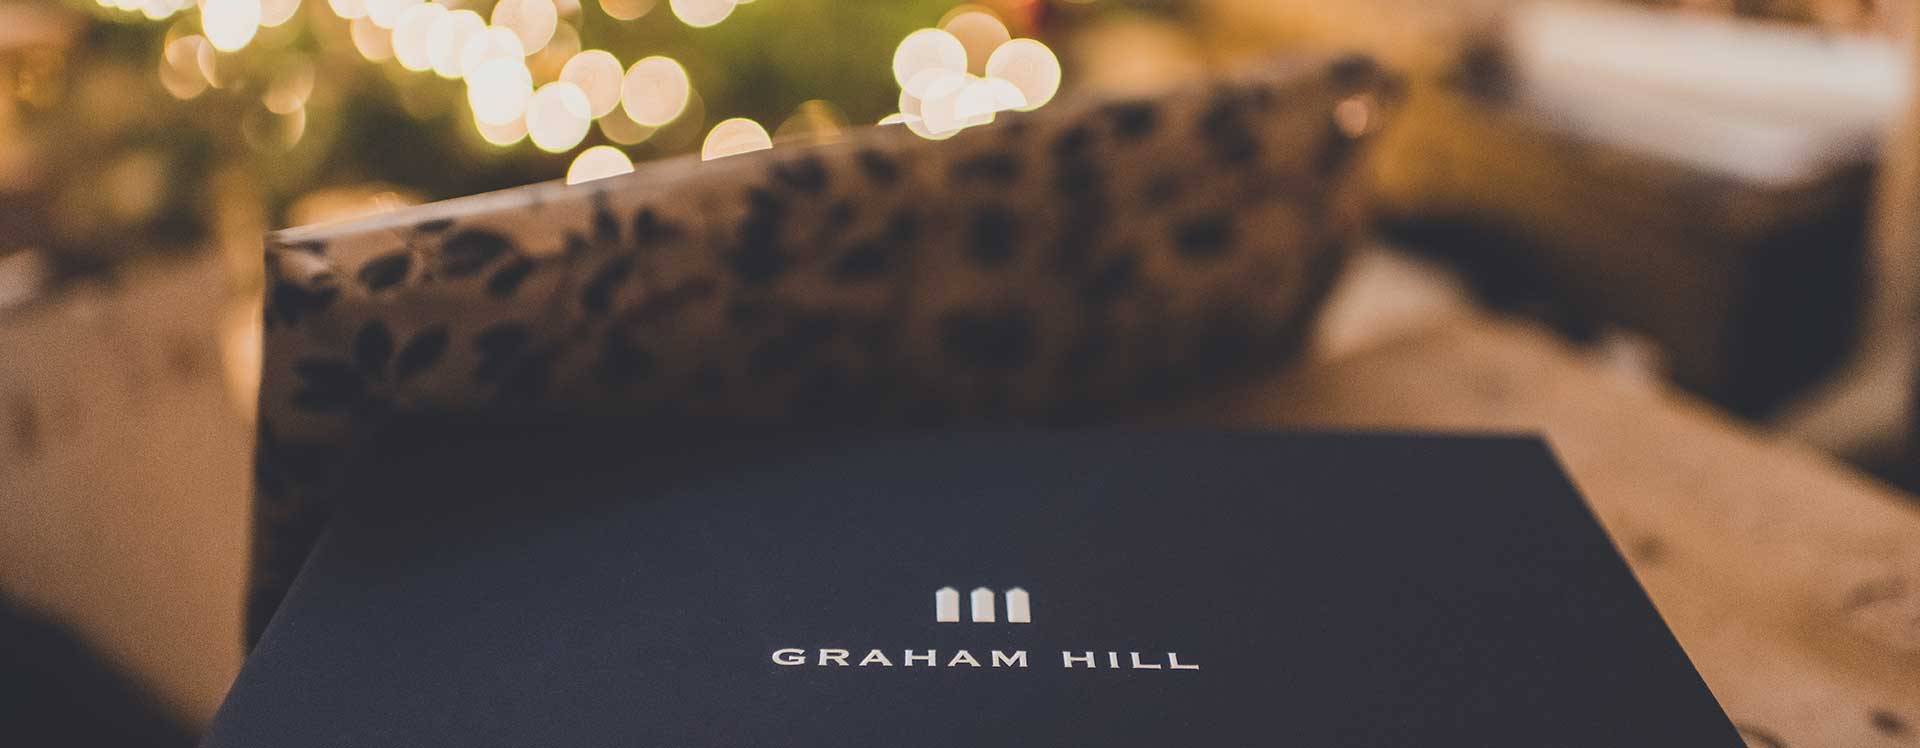 Graham Hill gift box unwrapped and sitting near tree